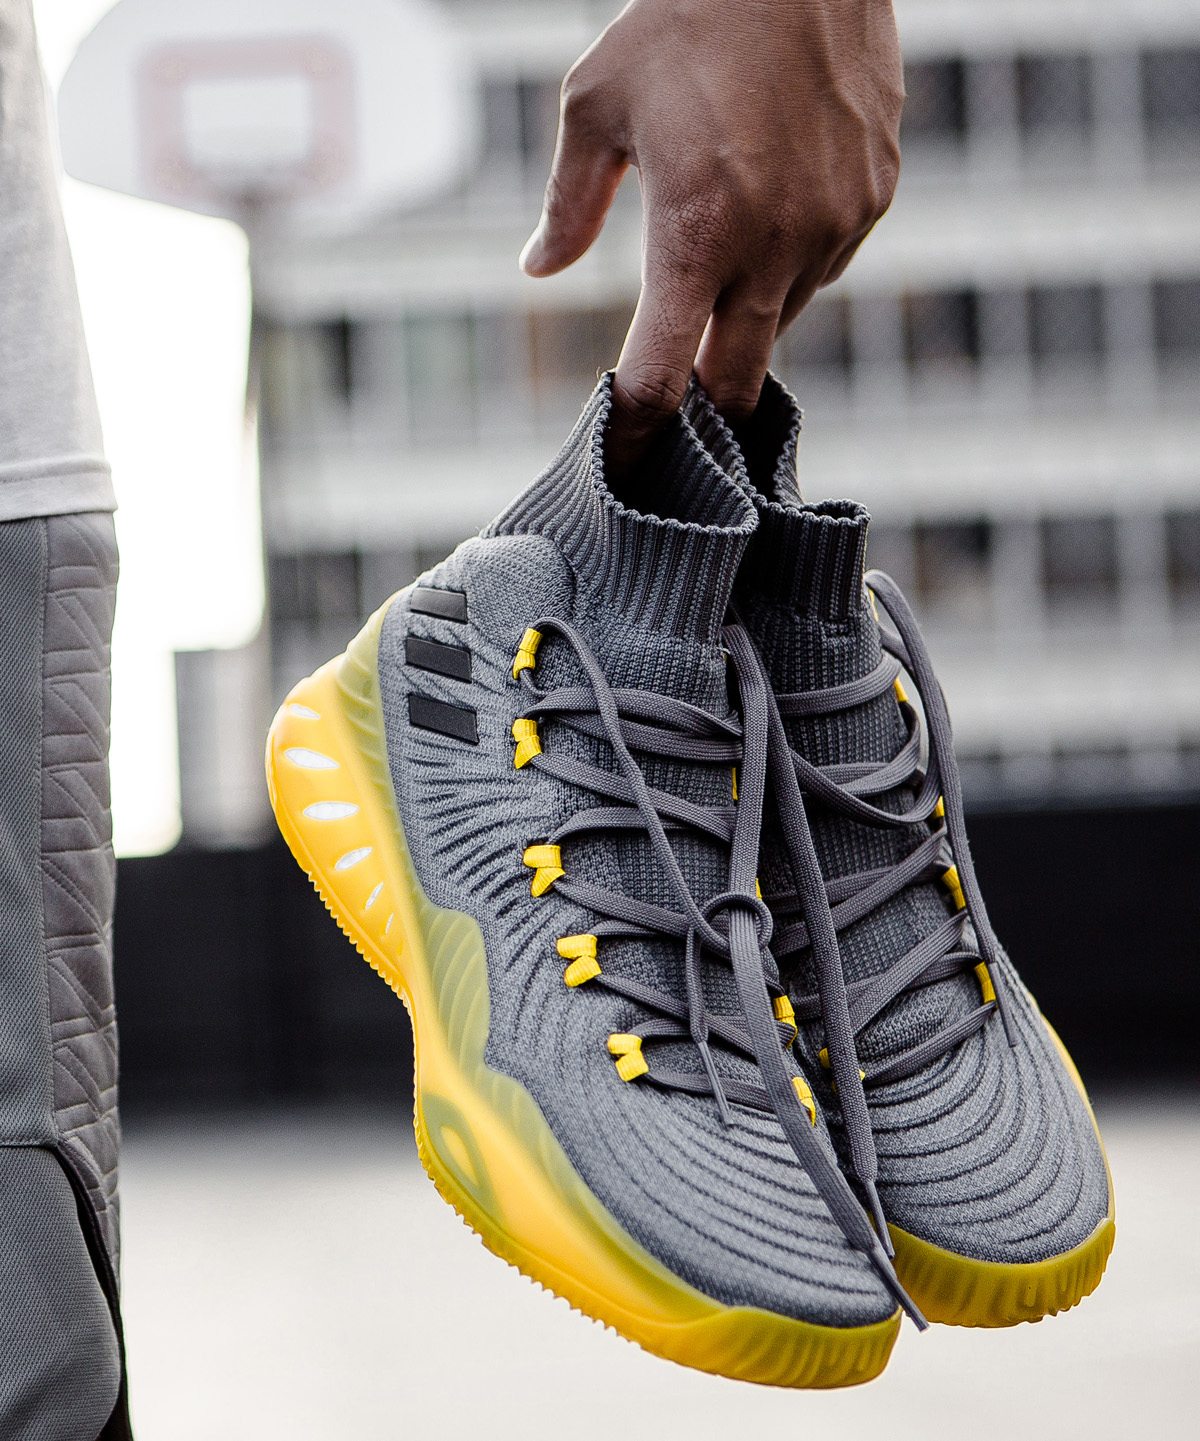 Interview // Inside The adidas Crazy Explosive '17 Design With Jesse ...